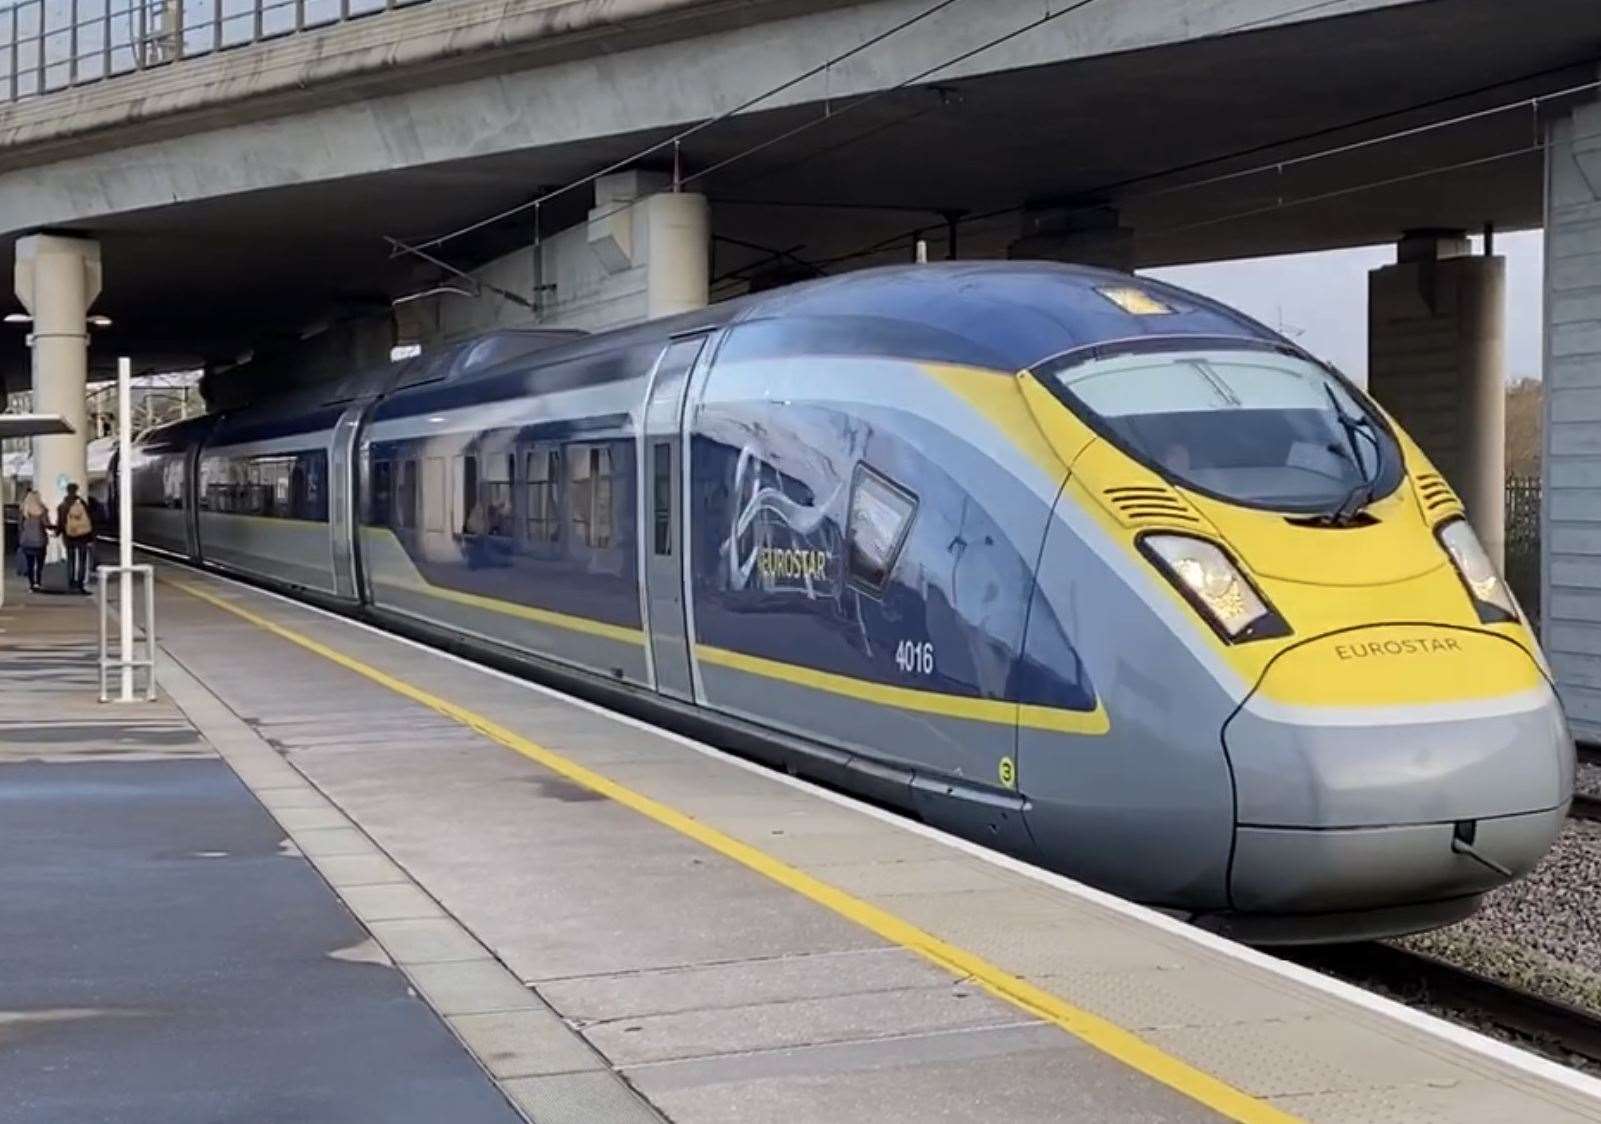 Eurostar trains are not currently stopping in Ashford. Picture: Steve Salter